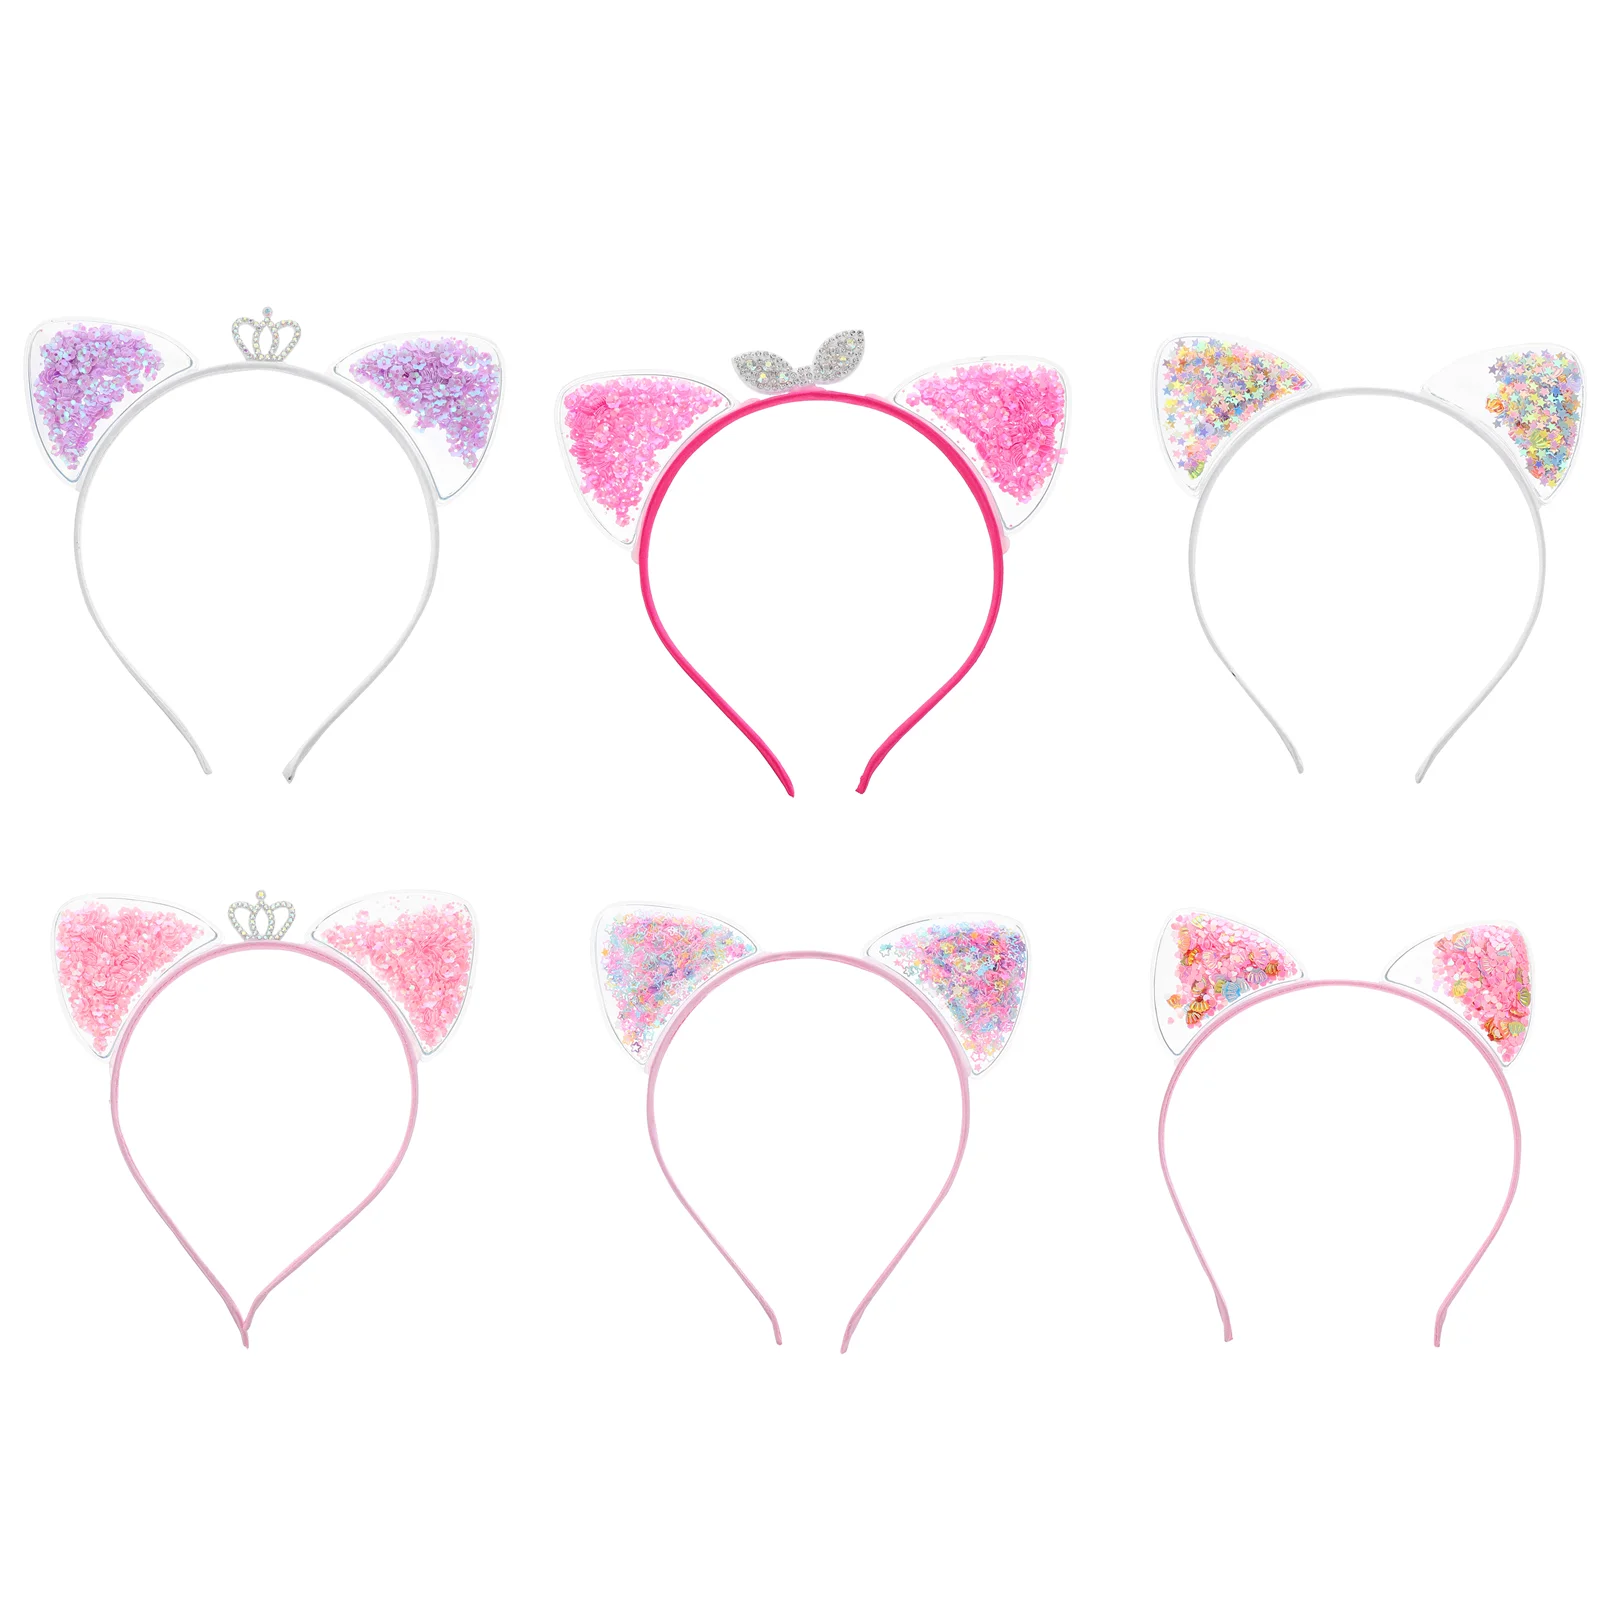 

6Pcs Cat Ears Adorable Hair Hoops Party Festival Creative Holiday Headbands Child Hairbands Hair Accessories